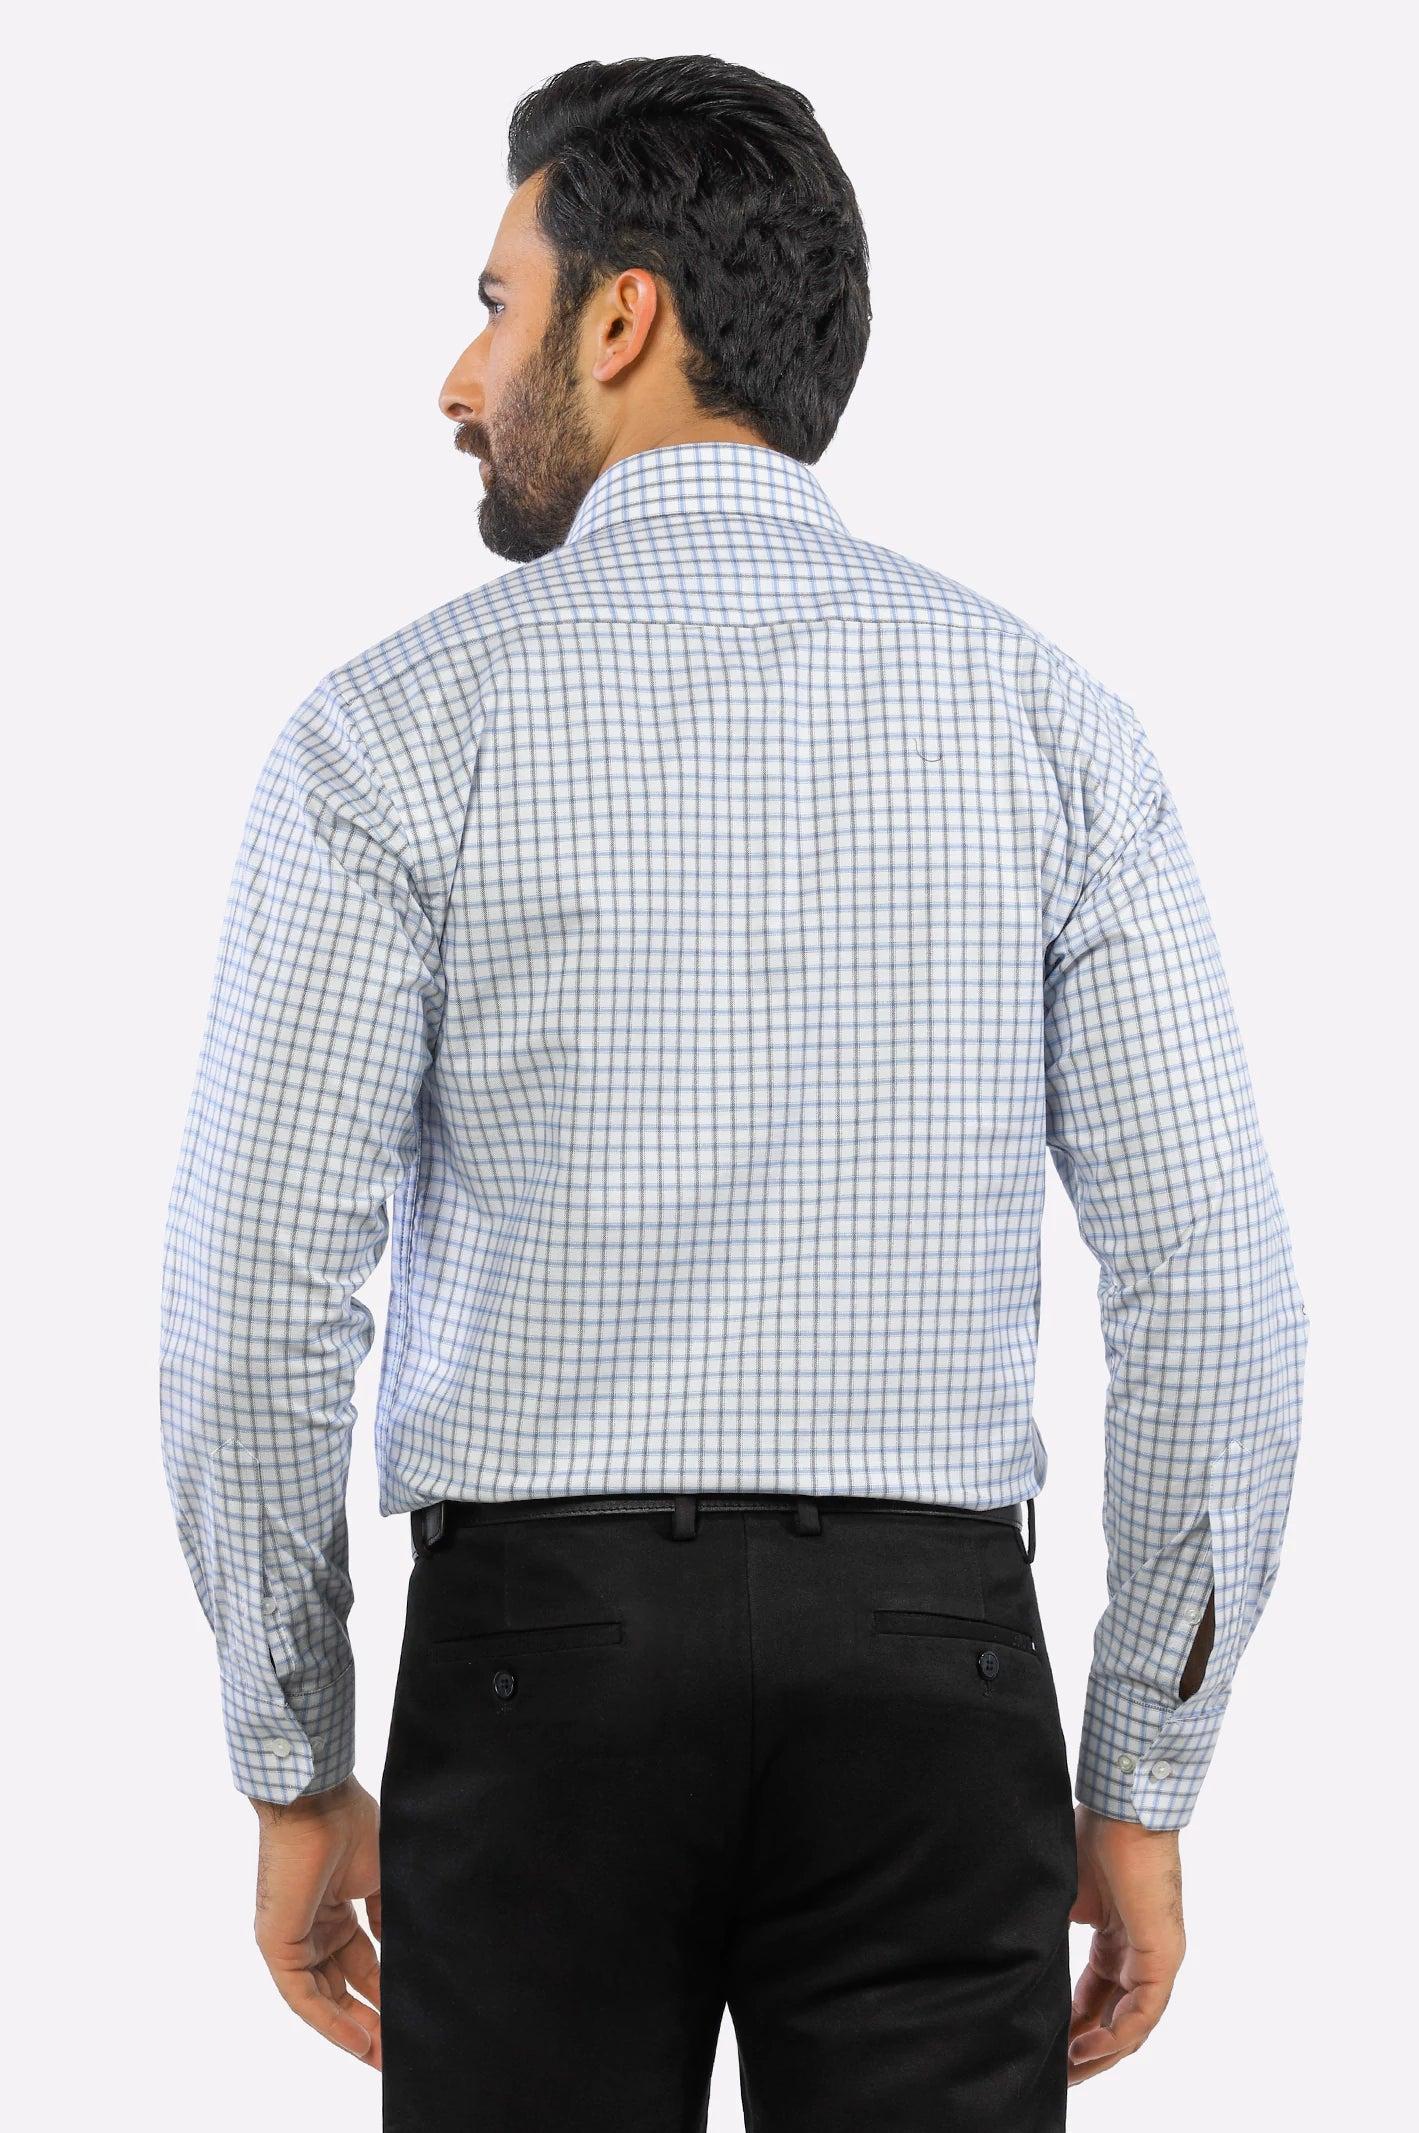 BLUE GRAPH FOR | | SHIRT modern UNDEFINED For MODJEN THE | the GENERATION CHECK Modjen FORMAL - MODERN Generation DINERS 